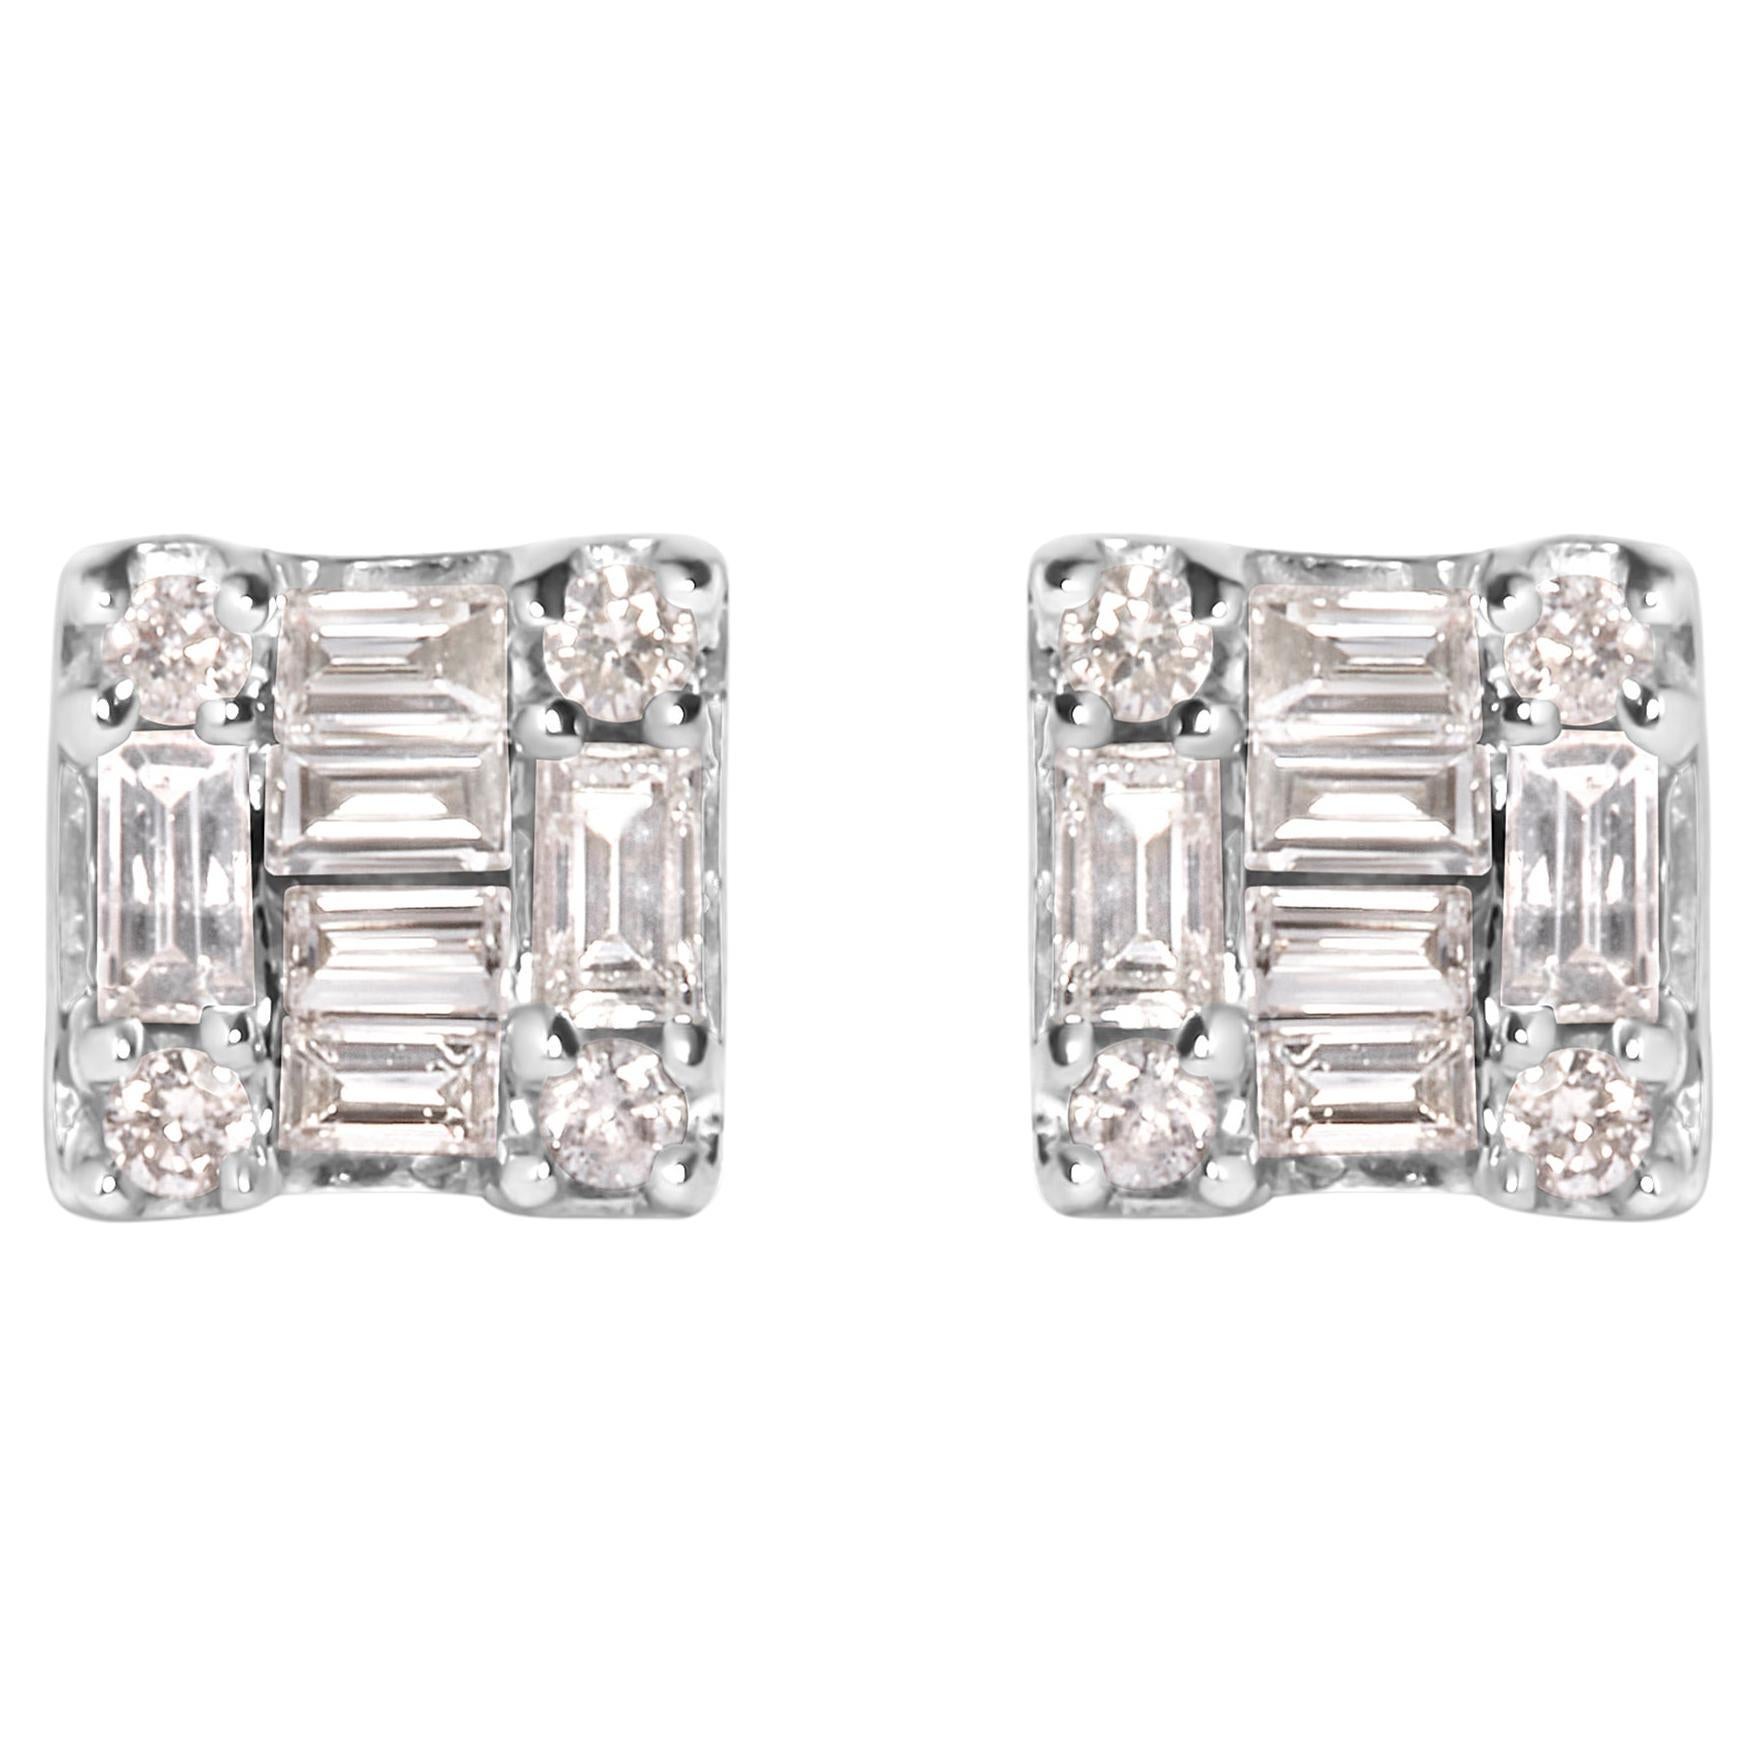 10K White Gold 1/7 Carat Round and Baguette Diamond Mosaic Square Stud Earrings For Sale